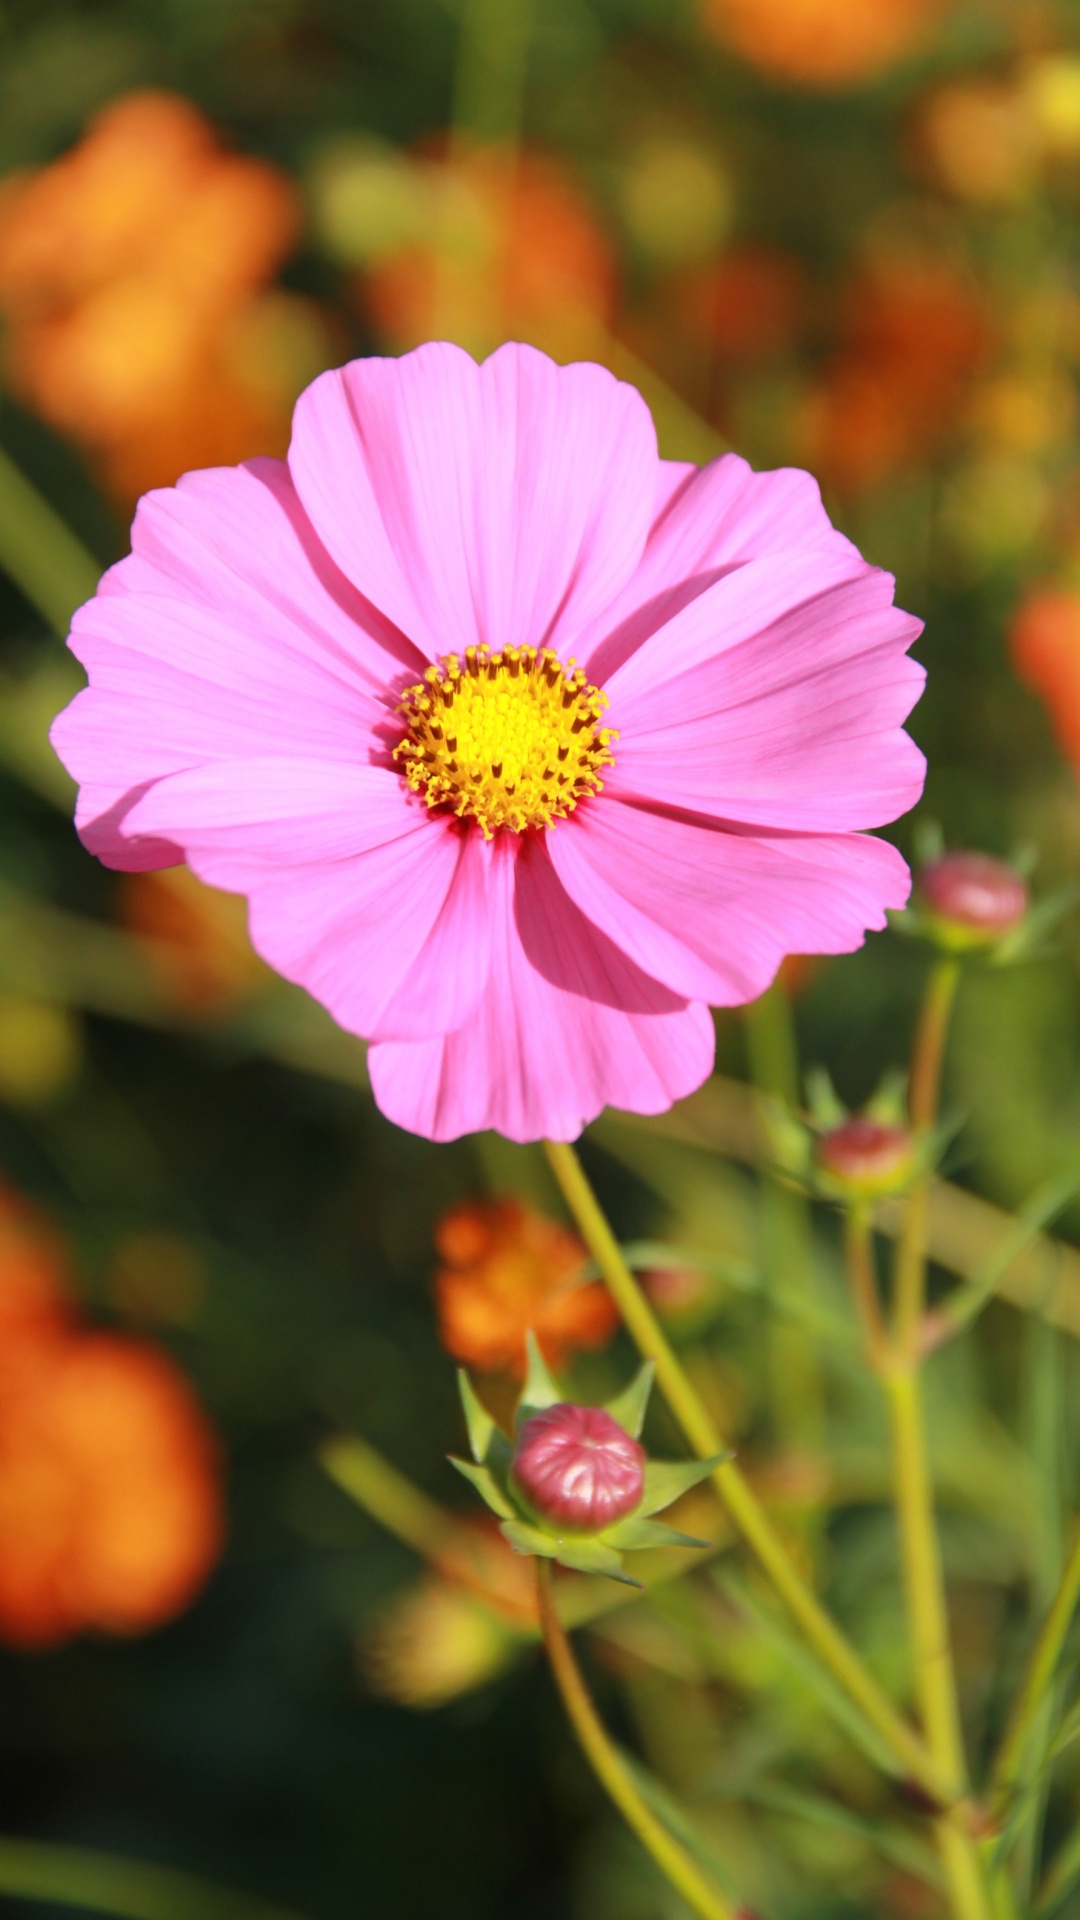 Pink Cosmos Flower in Bloom During Daytime. Wallpaper in 1080x1920 Resolution